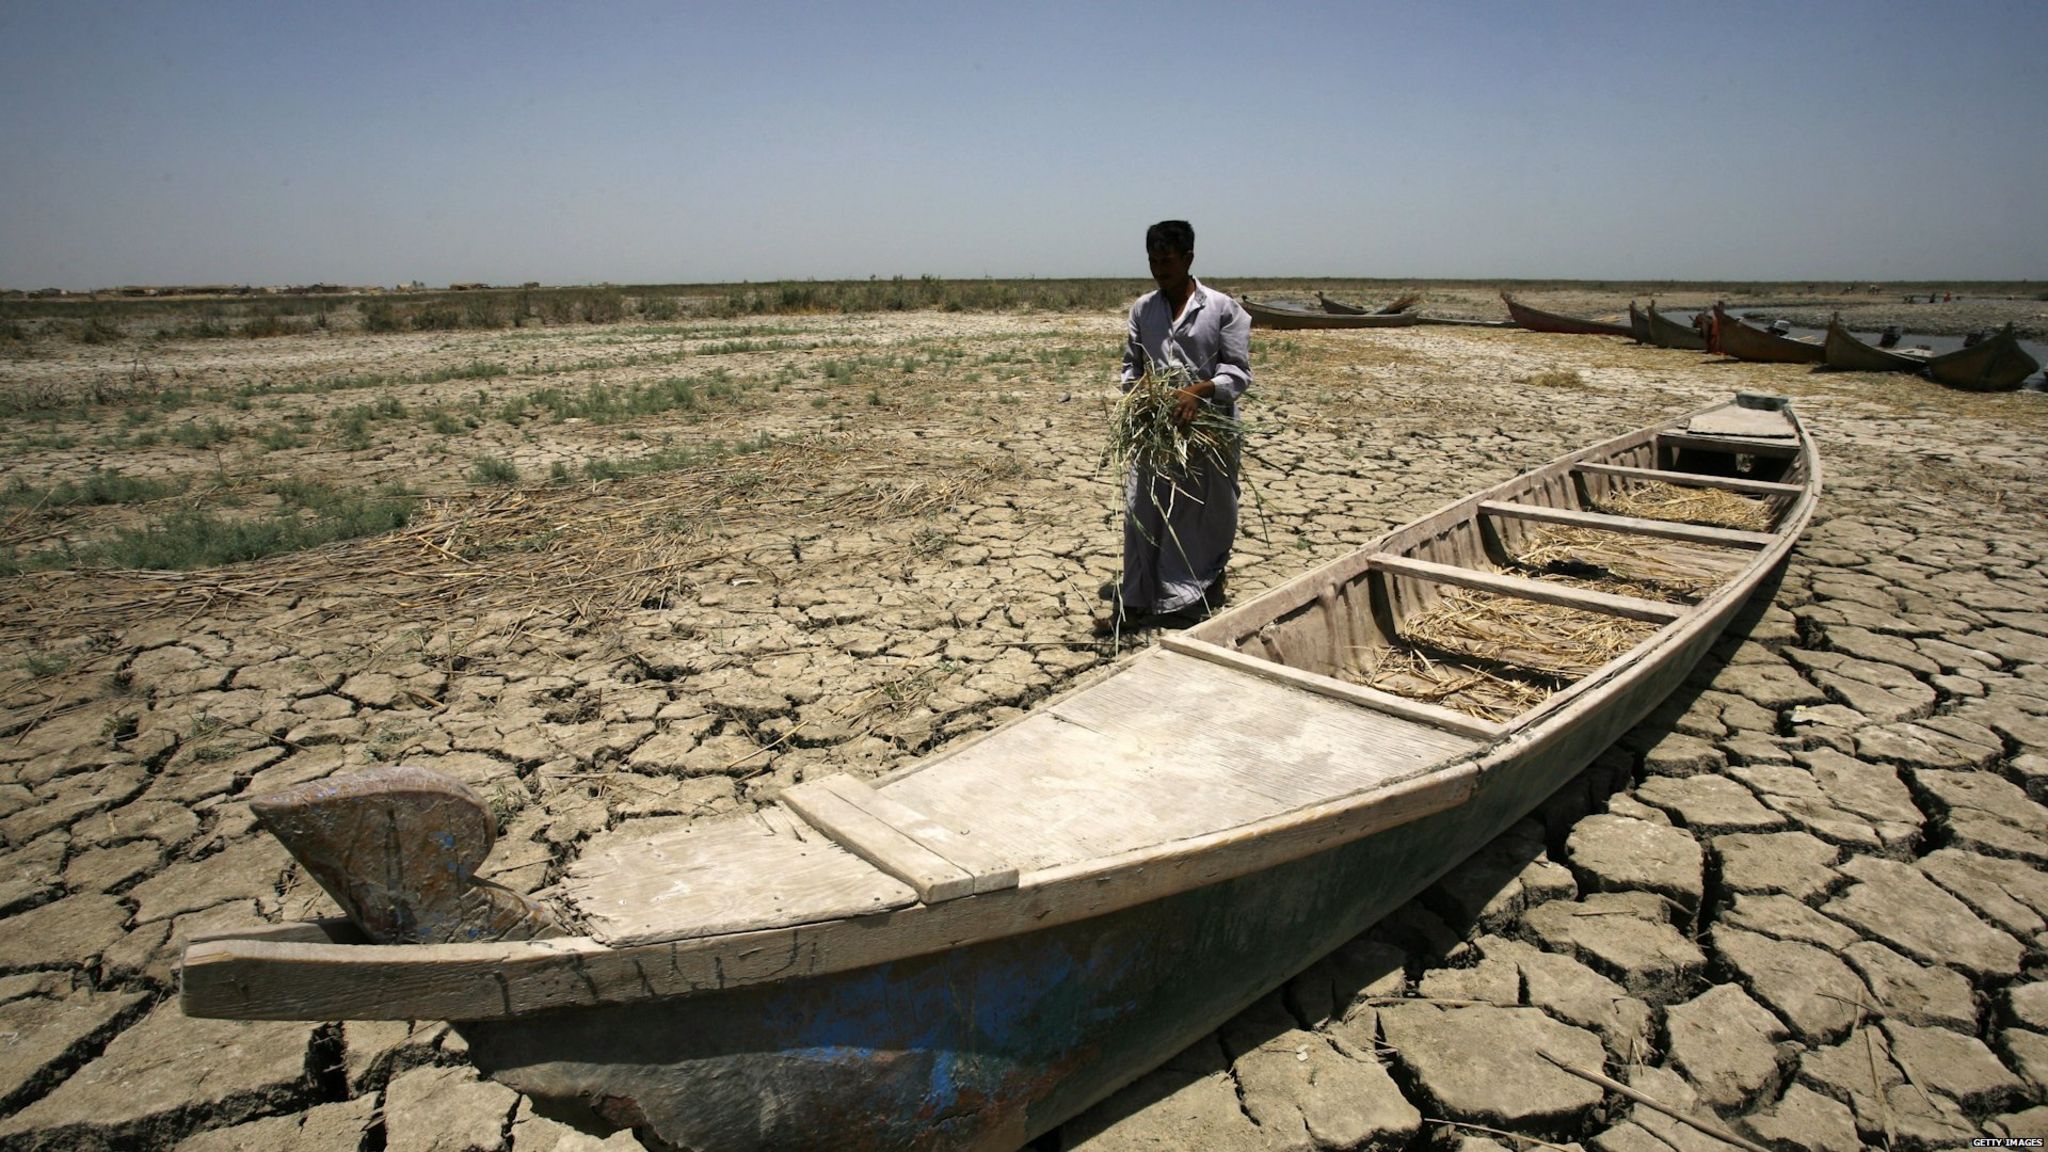 An Iraqi man walks past a canoe siting on dry, cracked earth in the Chibayish marshes near the southern Iraqi city of Nasiriyah